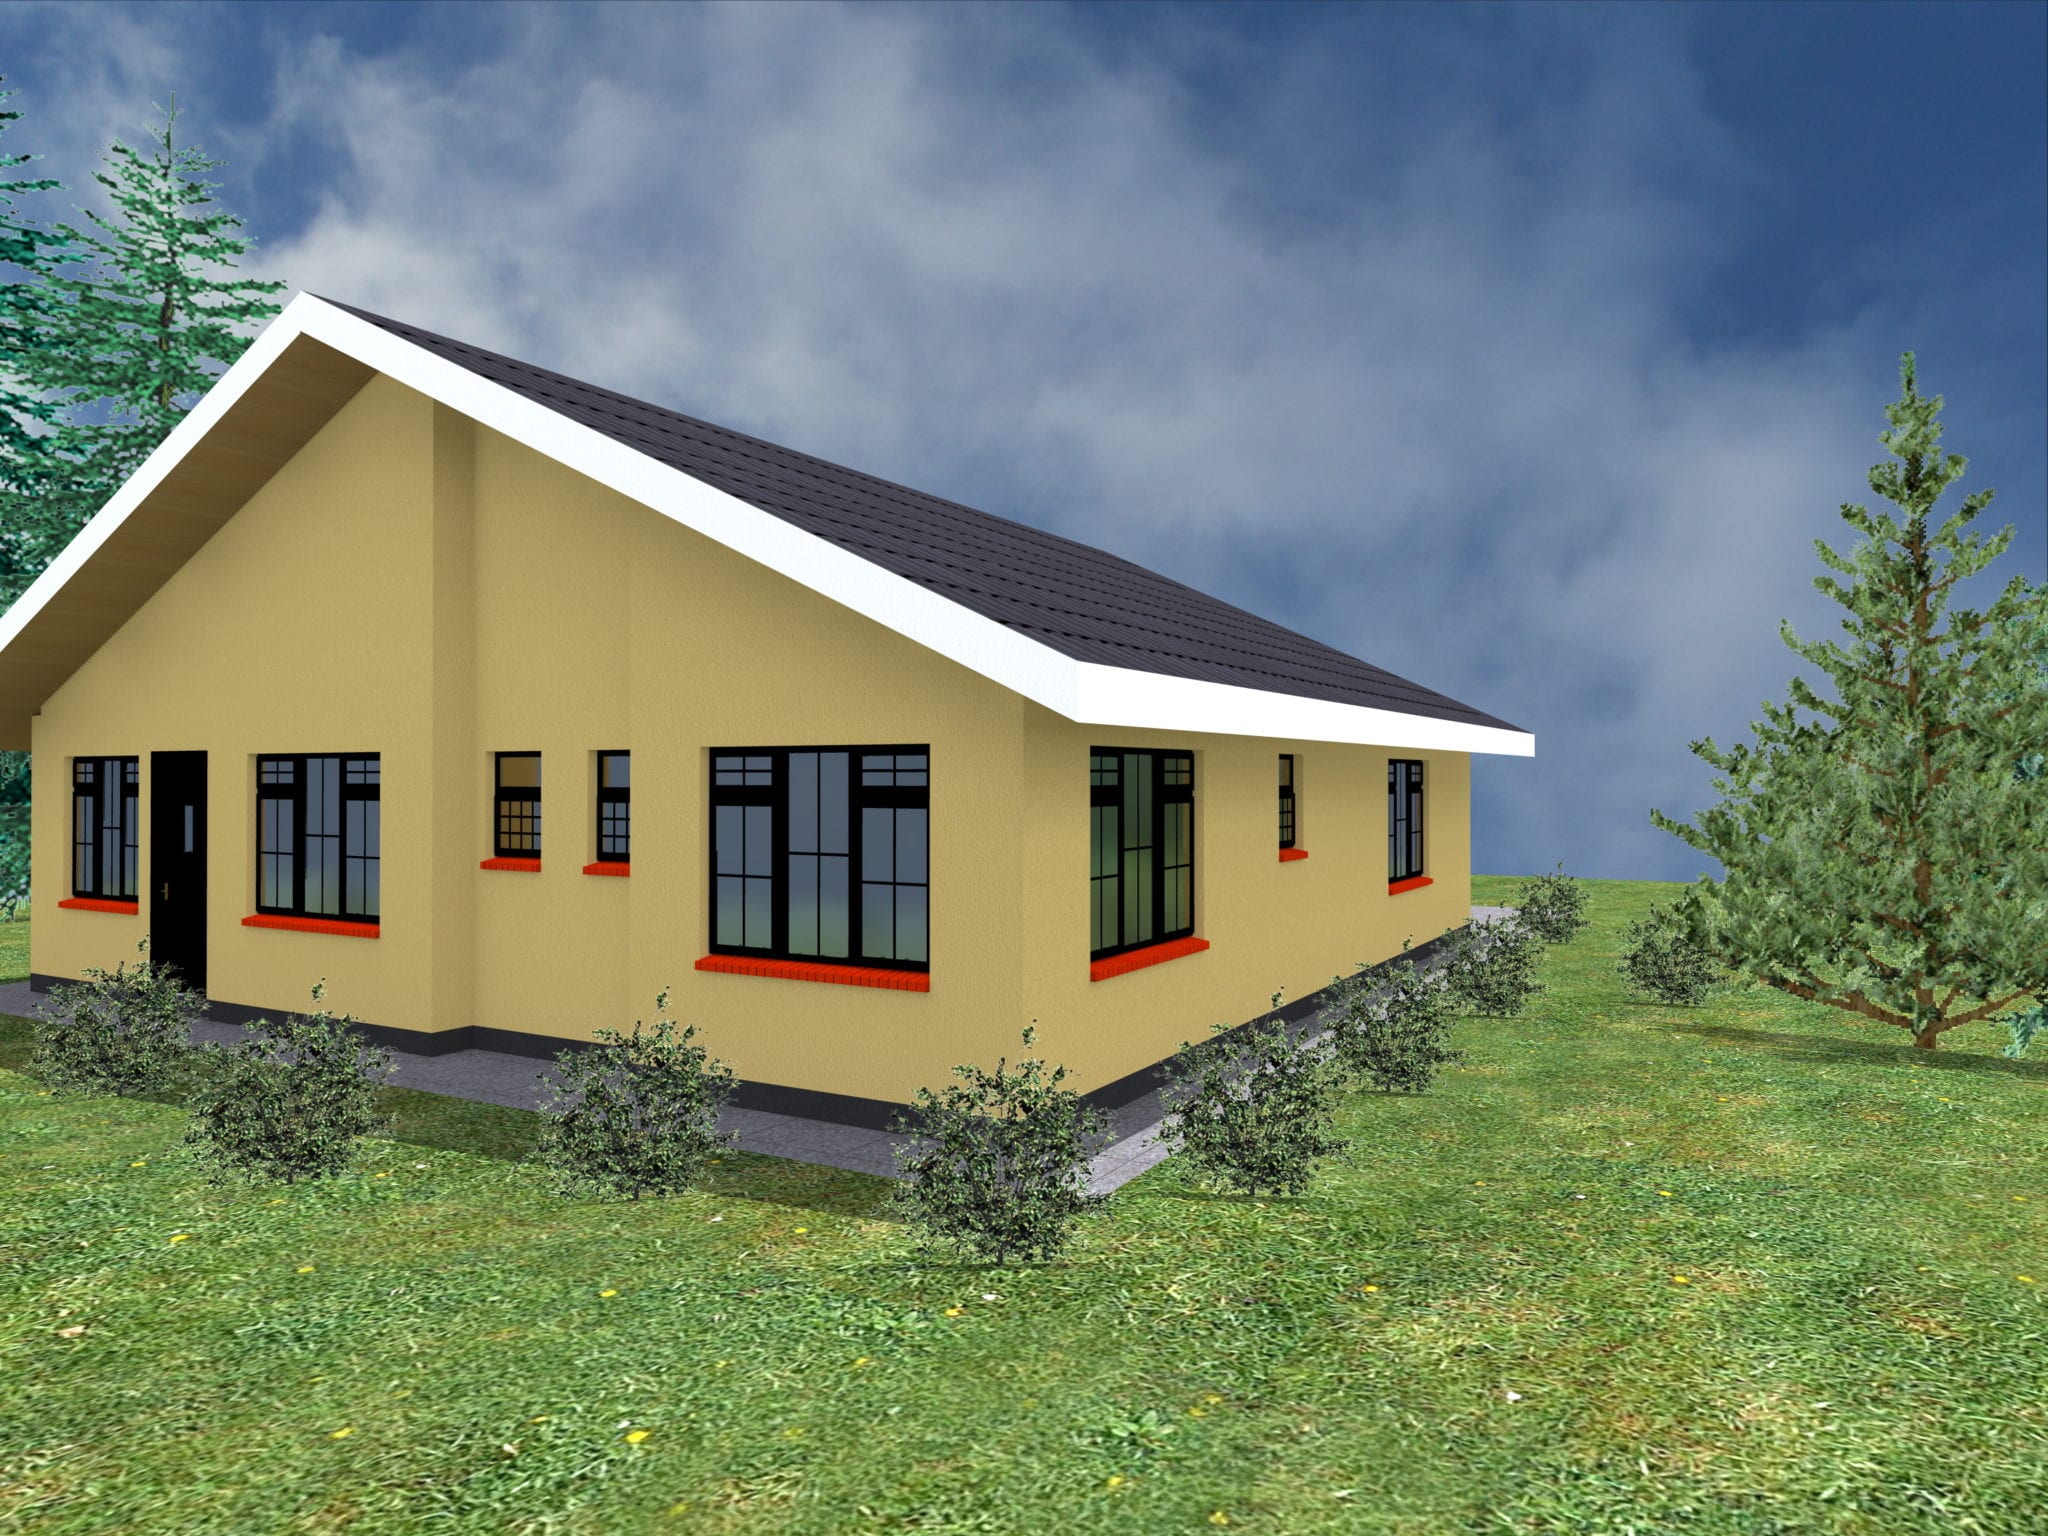 Simple 3 bedroom  house  plans  without  garage  HPD Consult